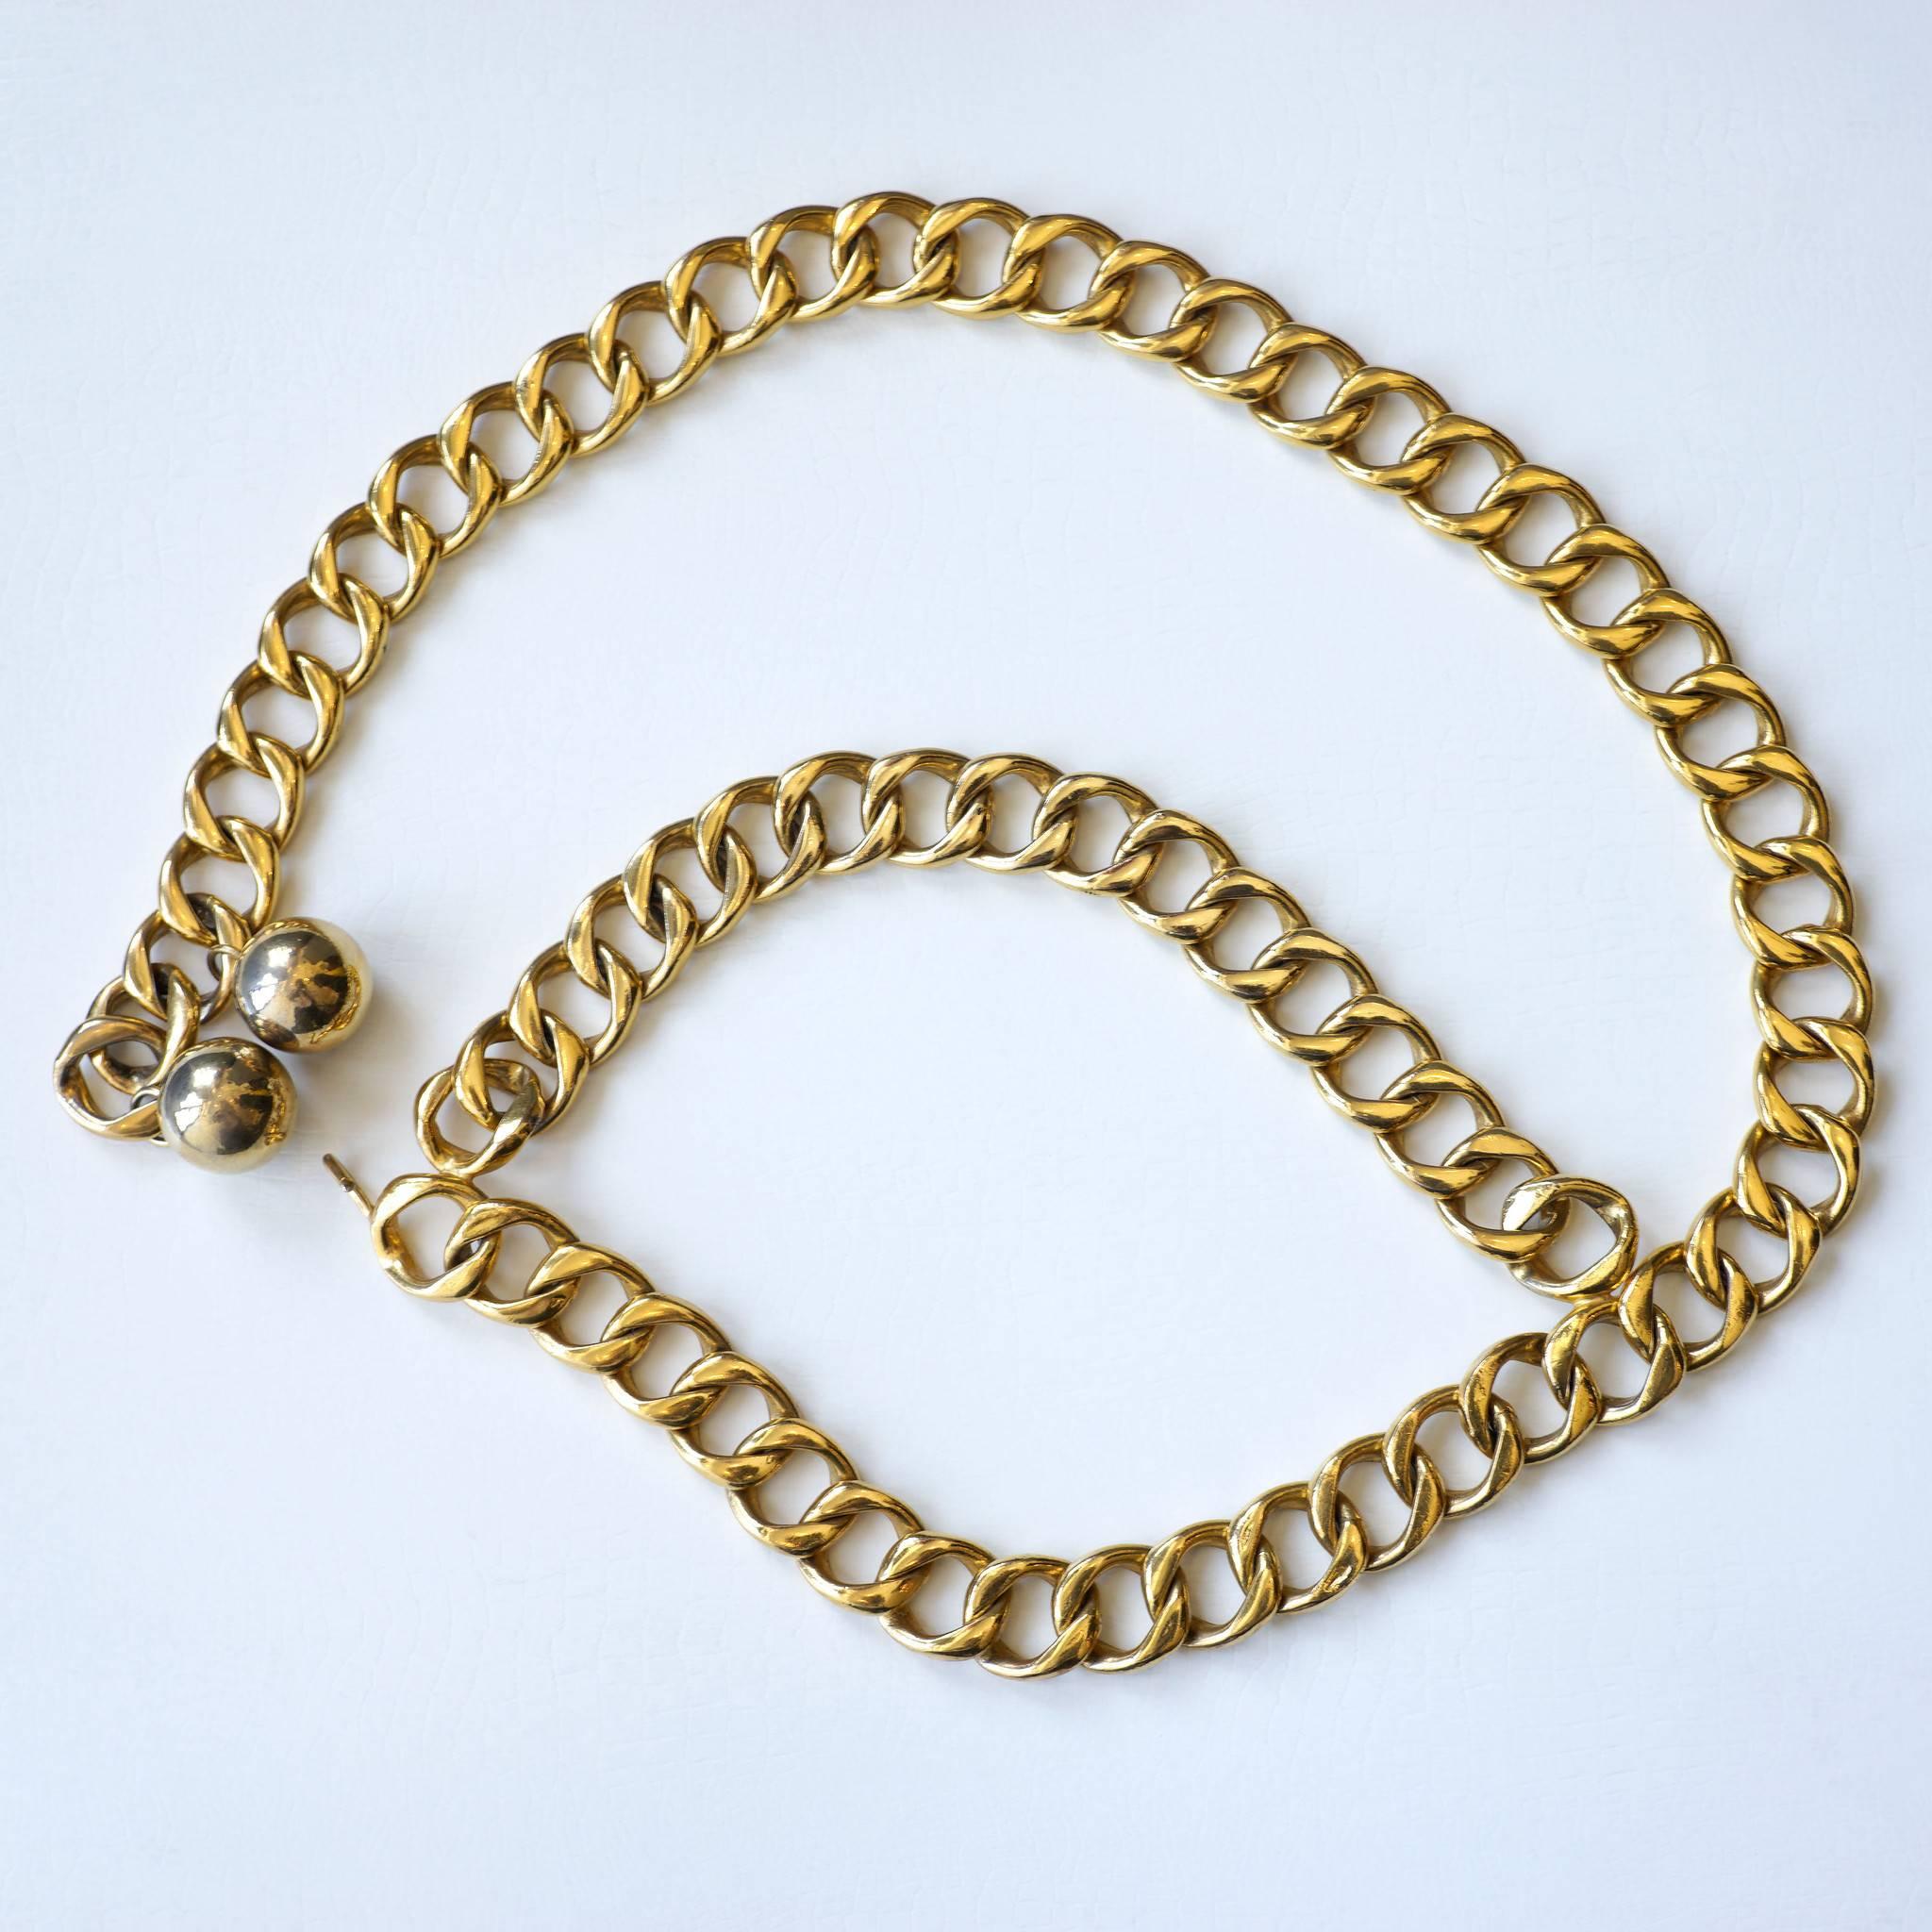 Chanel classic double chain belt with goldtone chain and two spheres on the end.  

-Measurements-
length: 31.5